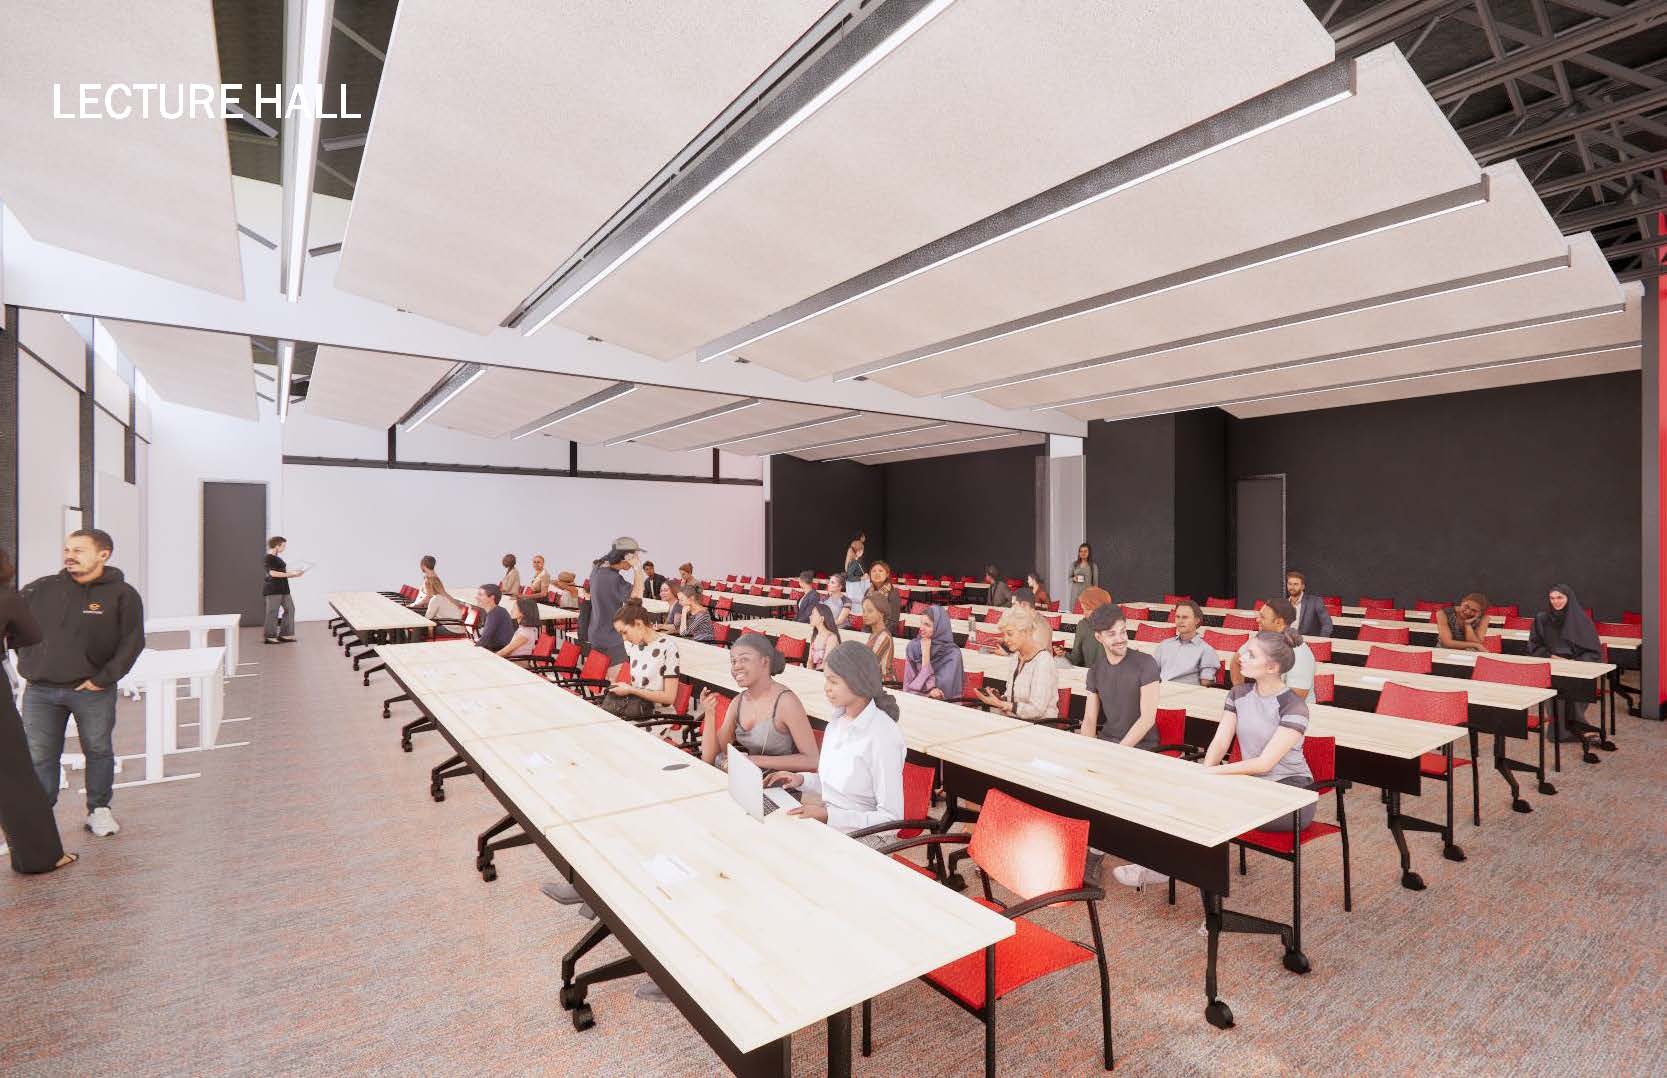 An artist rendering of students attending a class pictured from the front of a lecture hall.